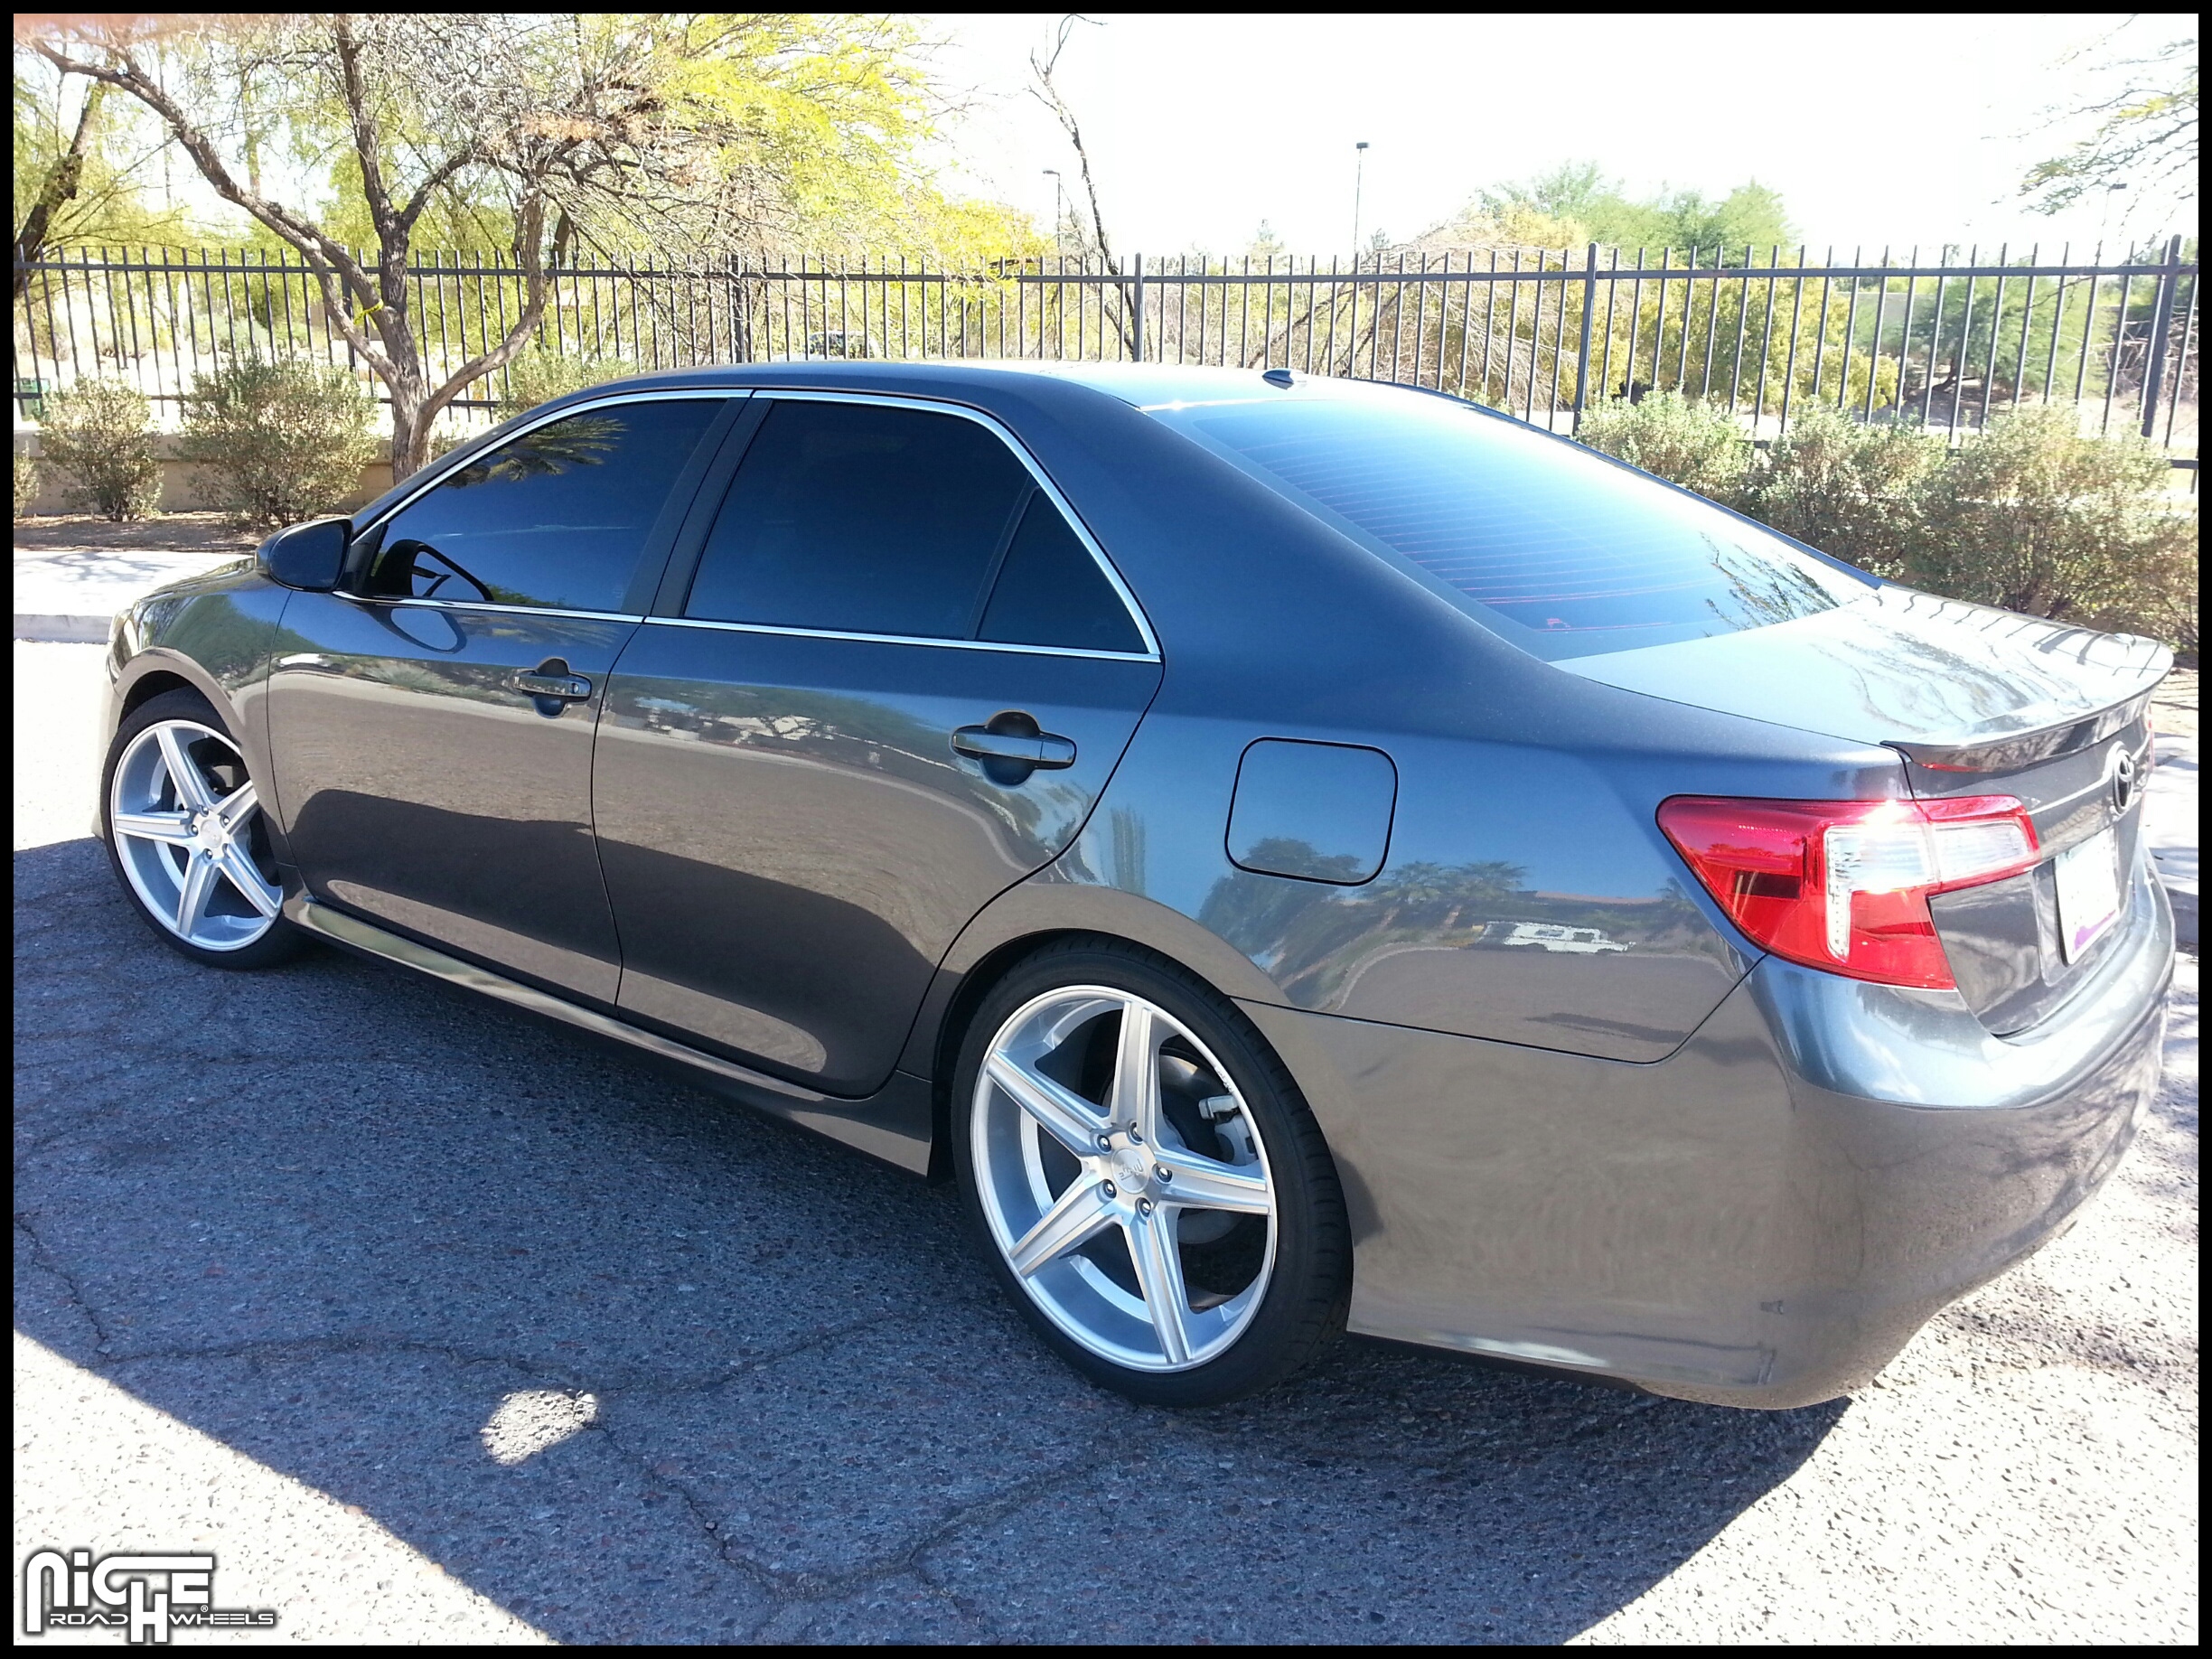 $2 5k Bud Stock 2013 Camry Page 2 Toyota Nation Forum Toyota Car and Truck Forums